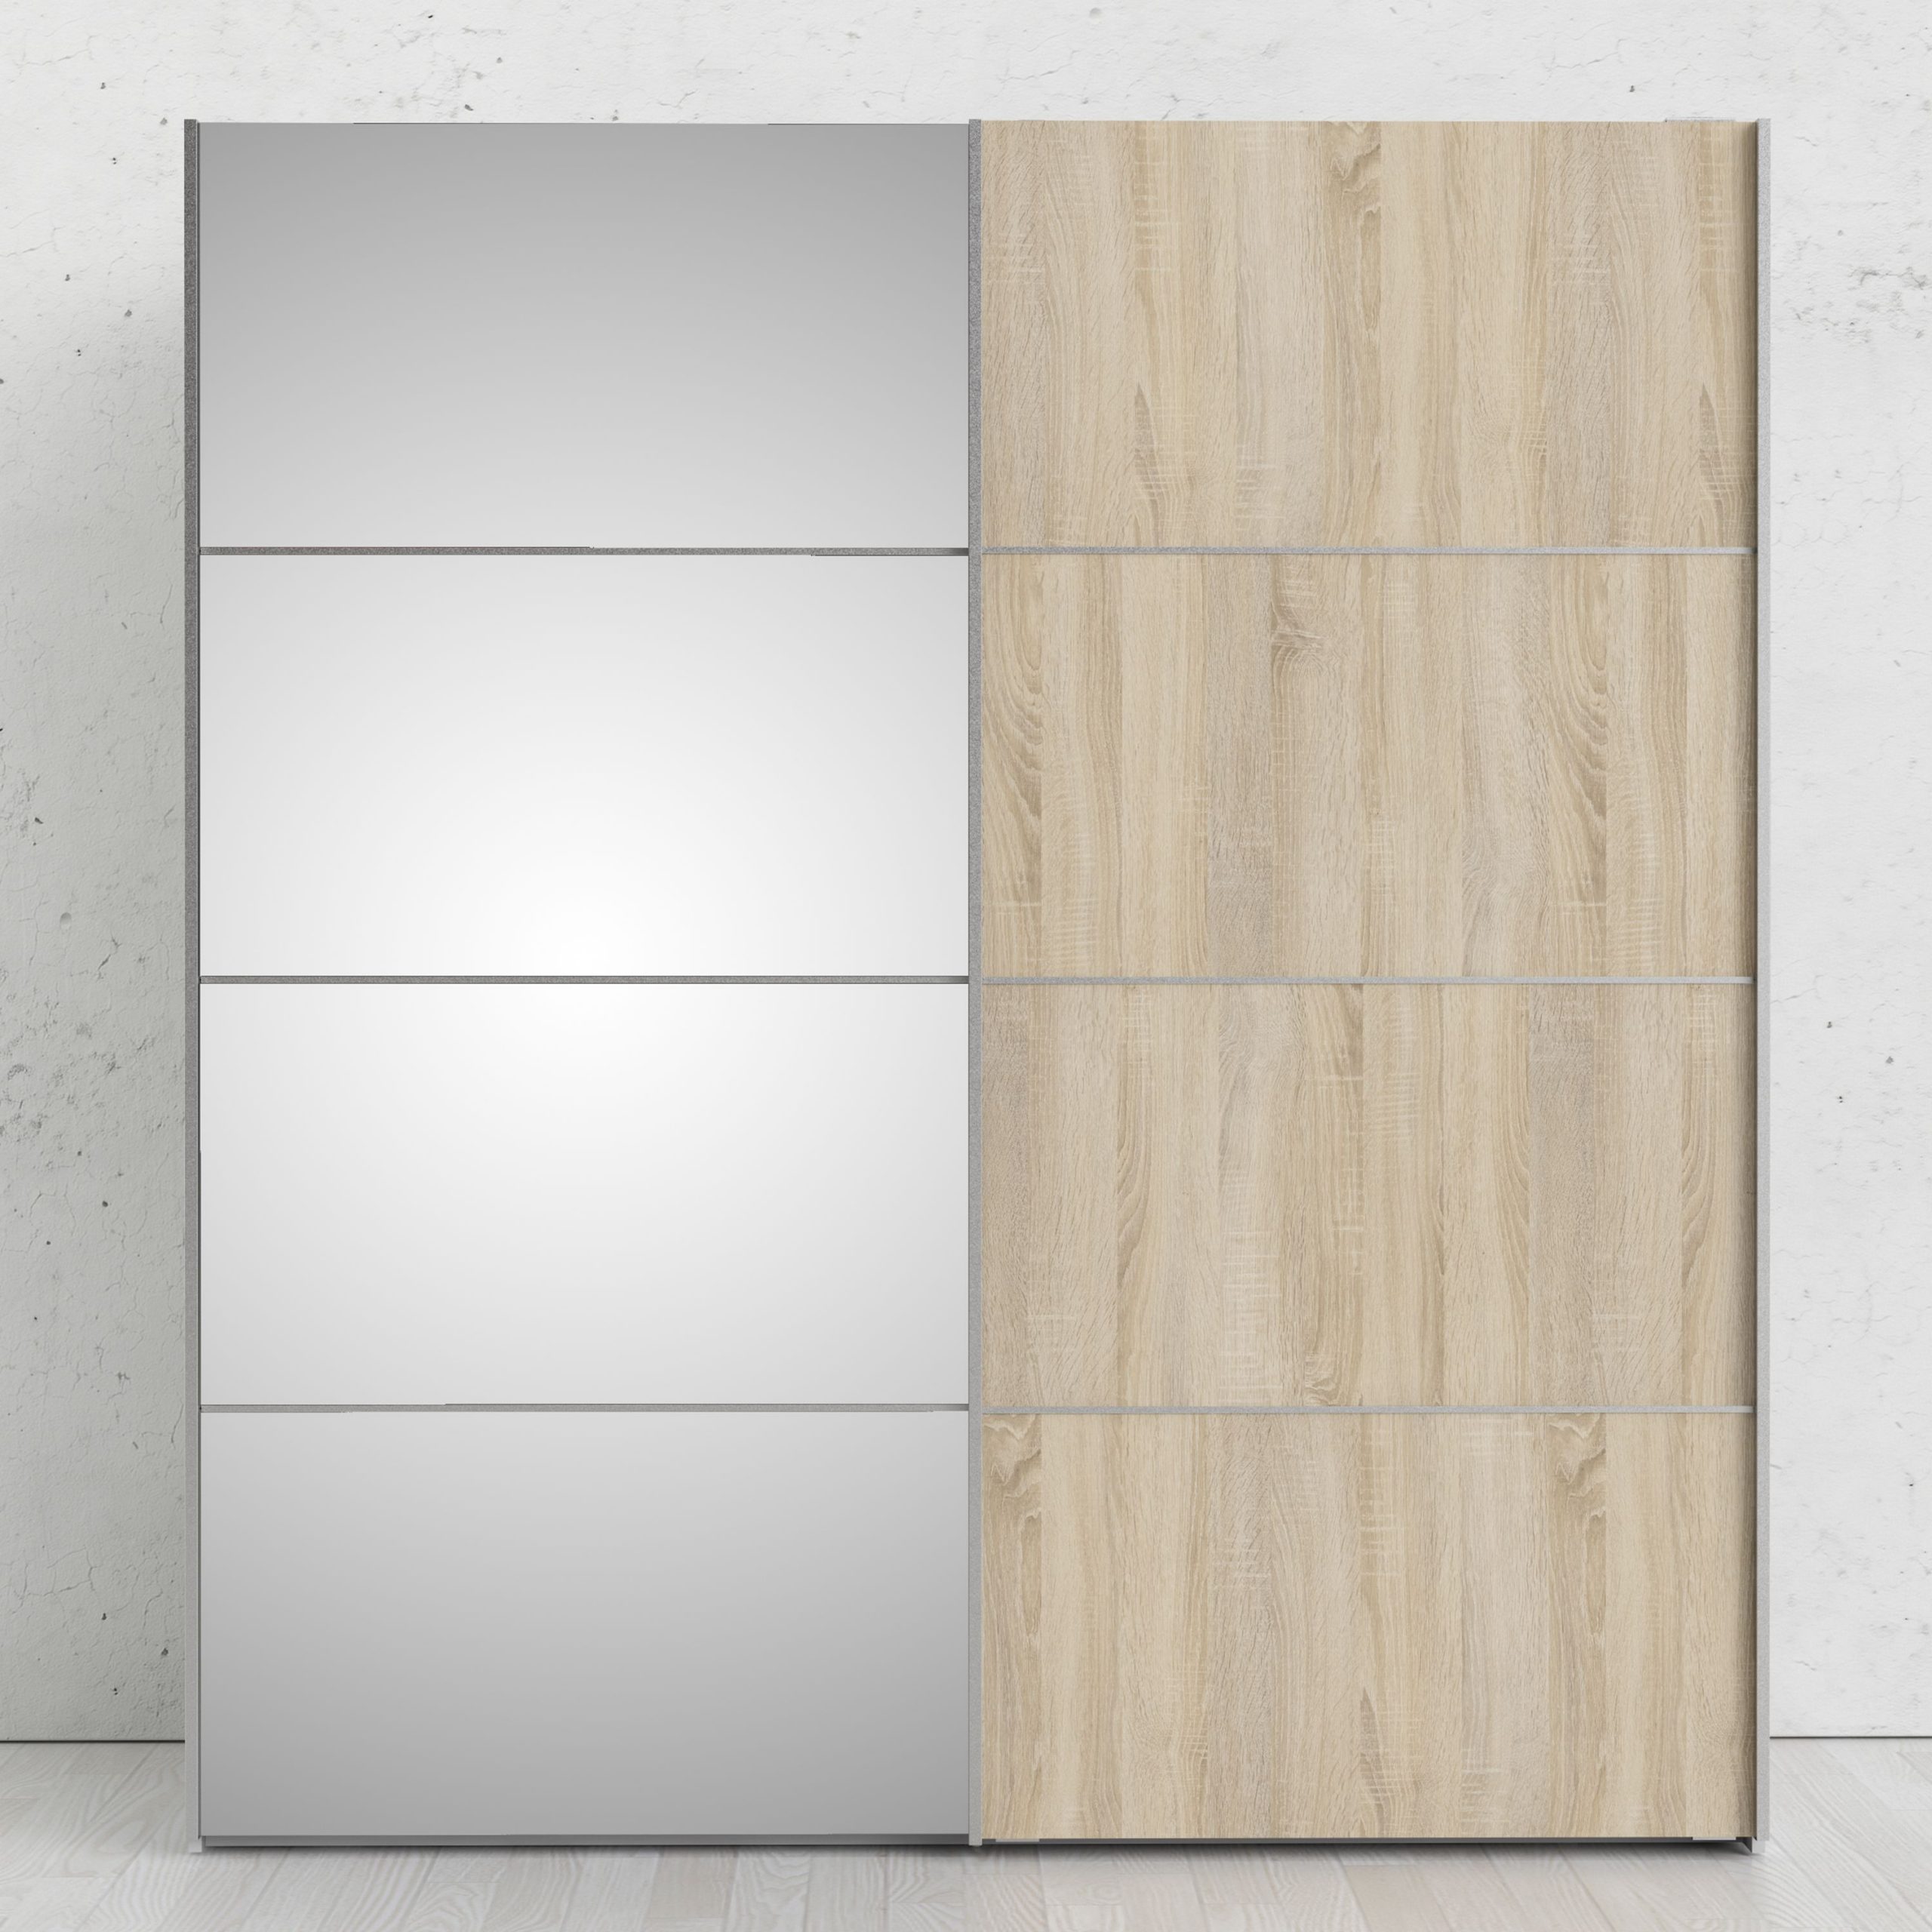 Verona Sliding Wardrobe 180cm In White With Oak And Mirror Doors With 2 Shelves